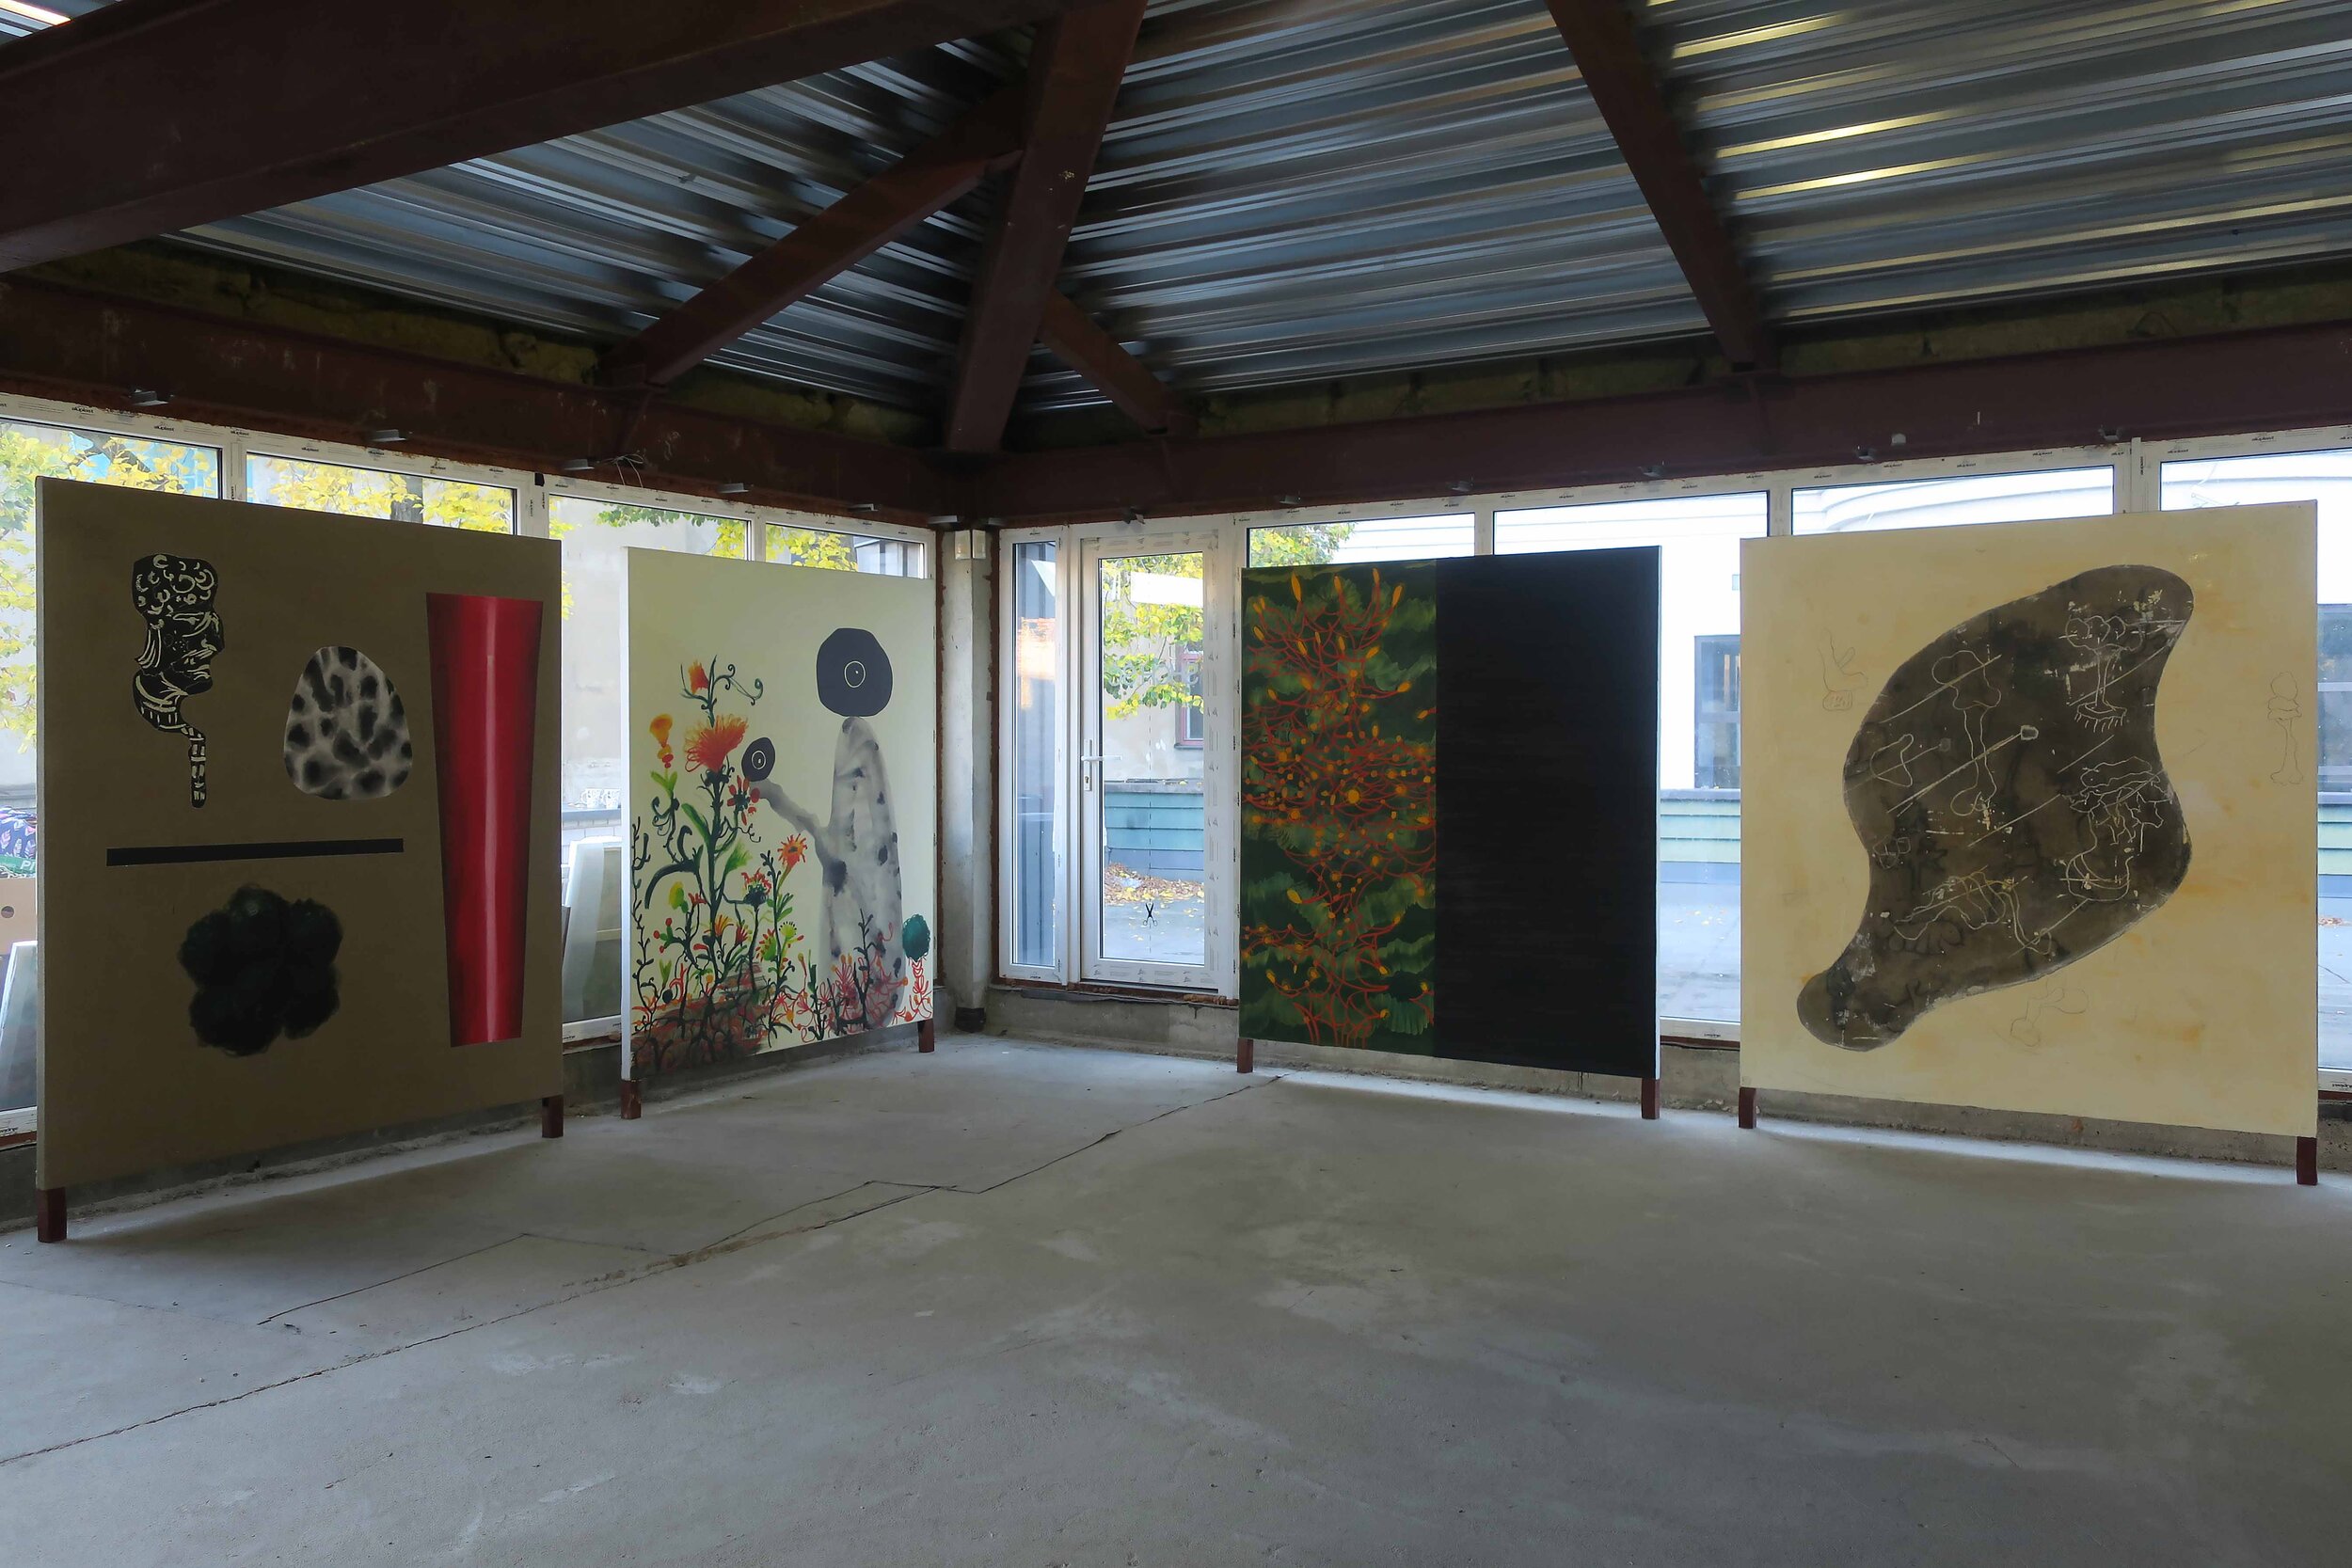  Adrian Mudder, “Rebus III”, “The garden”, “Duo” and “Schliemann”  each 200 × 180 cm, Oil, Acryl and Mixed Media on Canvas, 2013-2015 